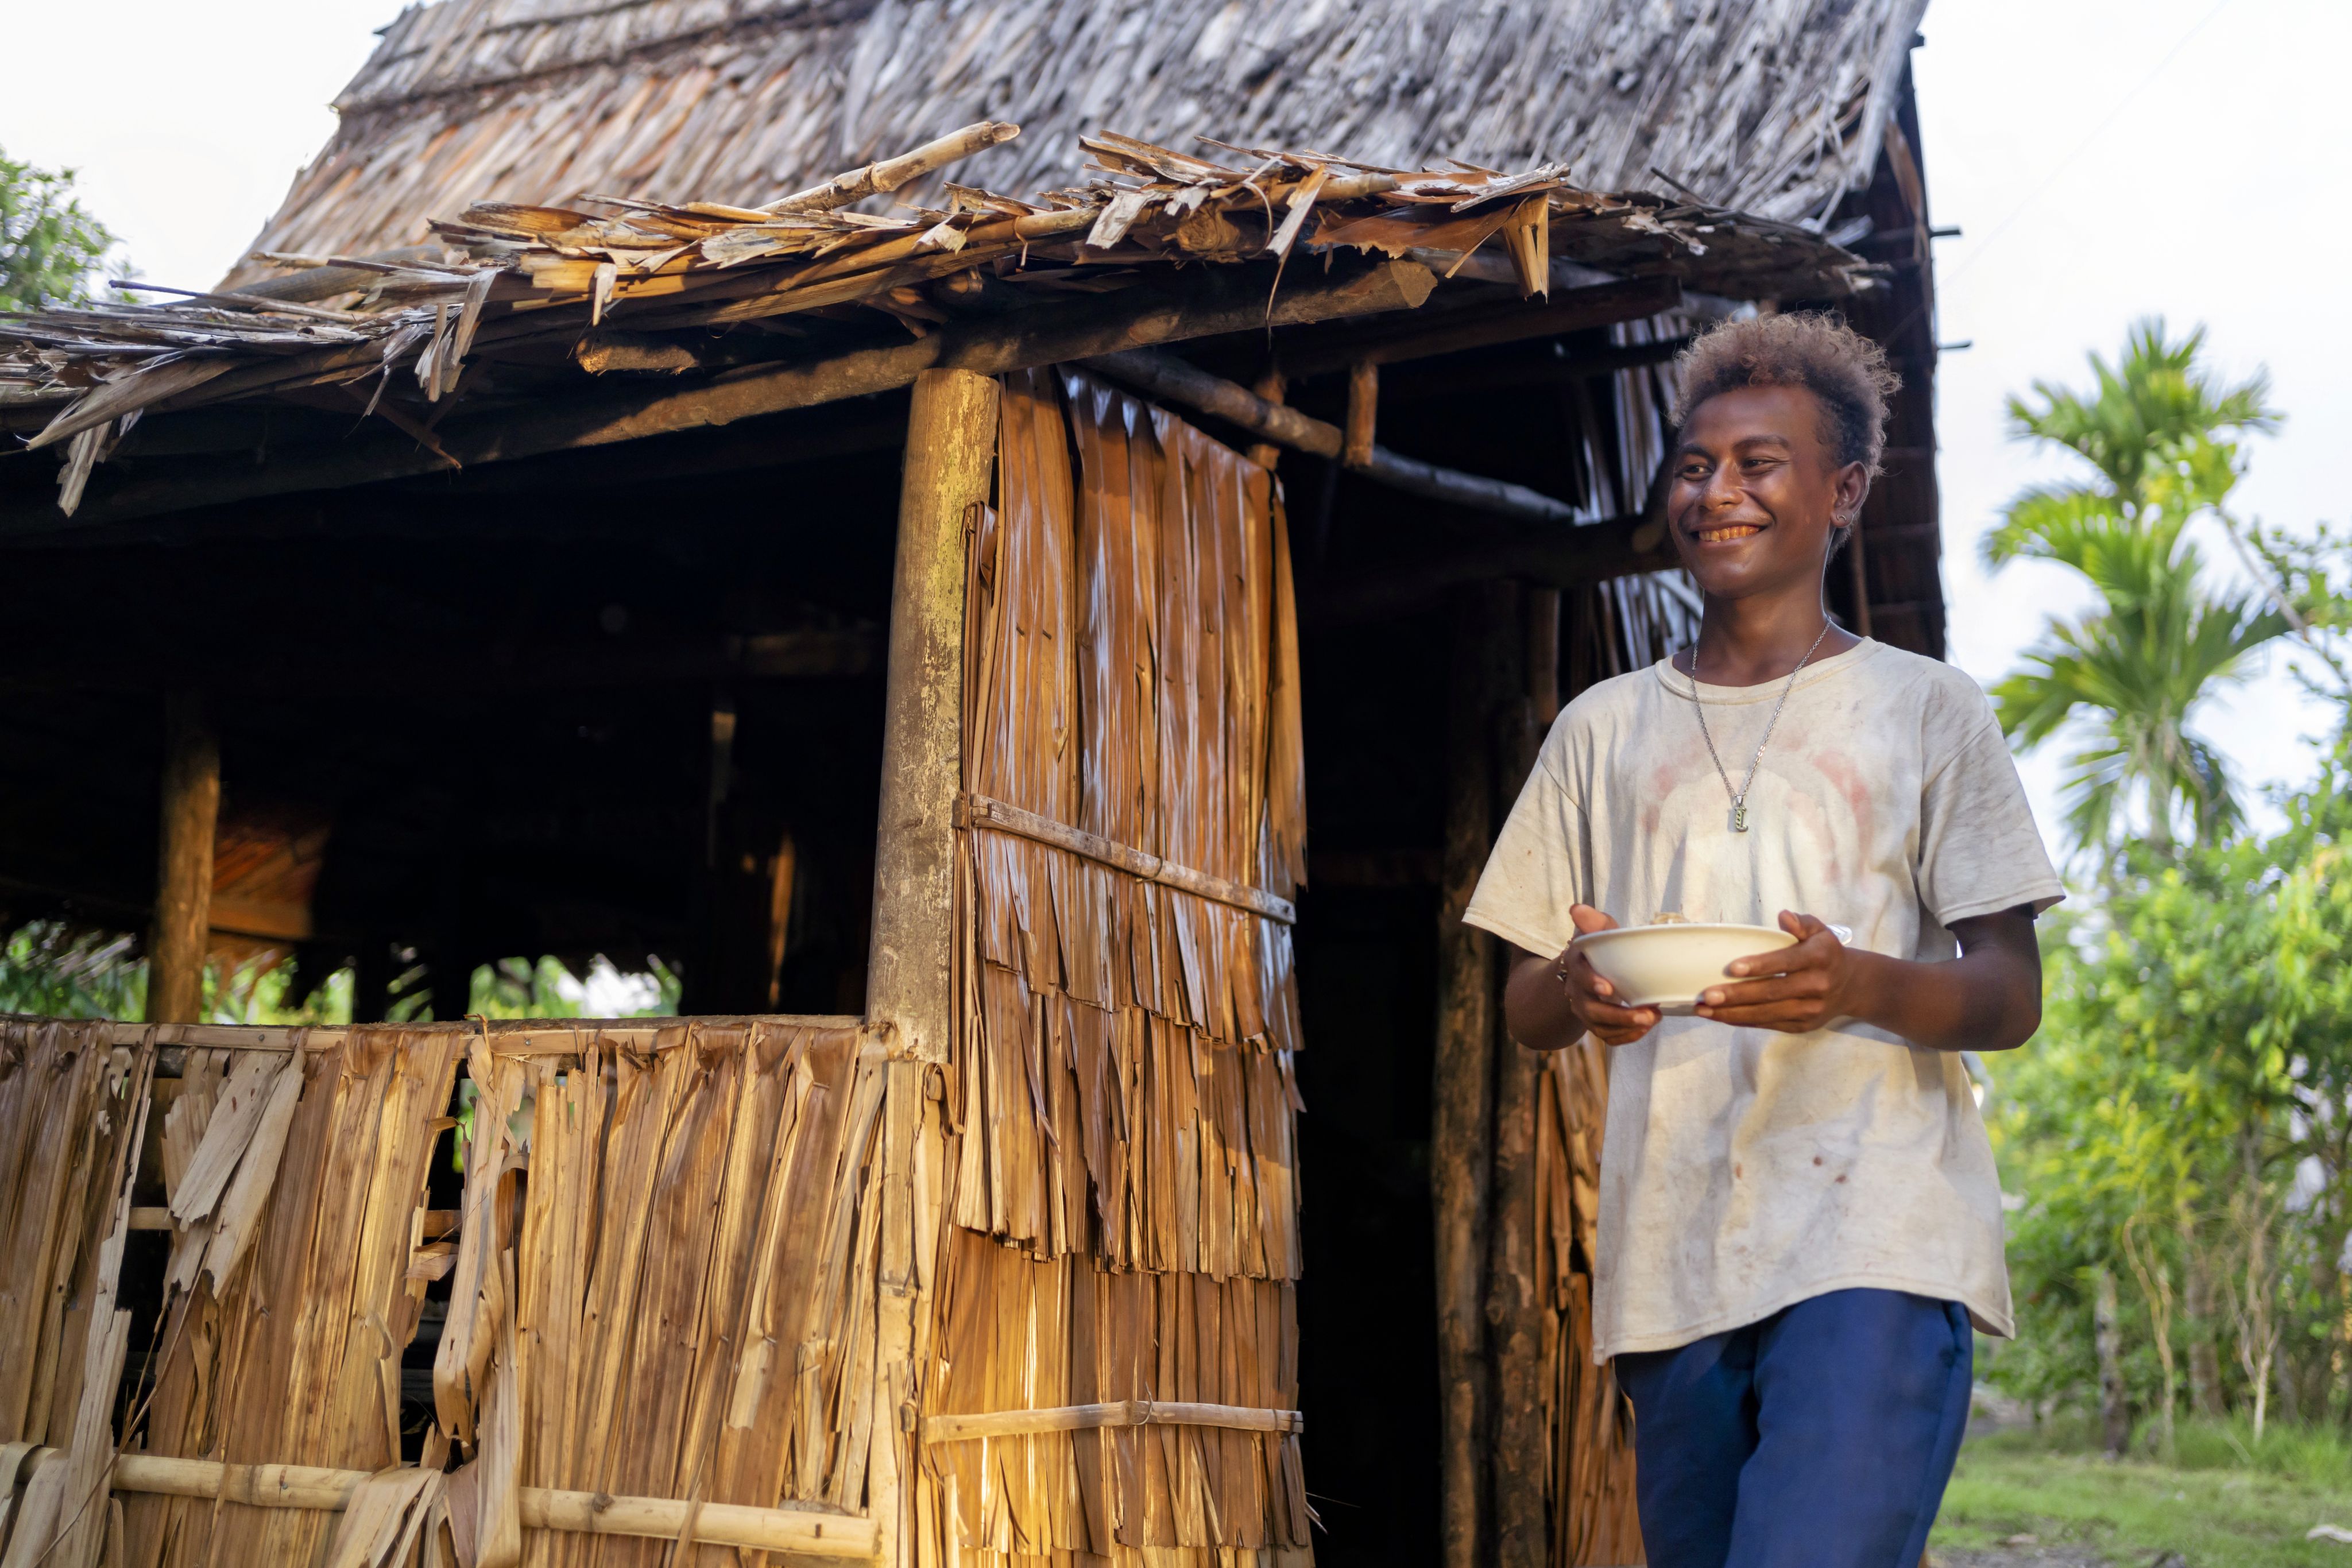 Junior, 16, carrying a bowl of food outside his home in a community affected by rising sea levels in Malaita Province, the Solomon Islands.